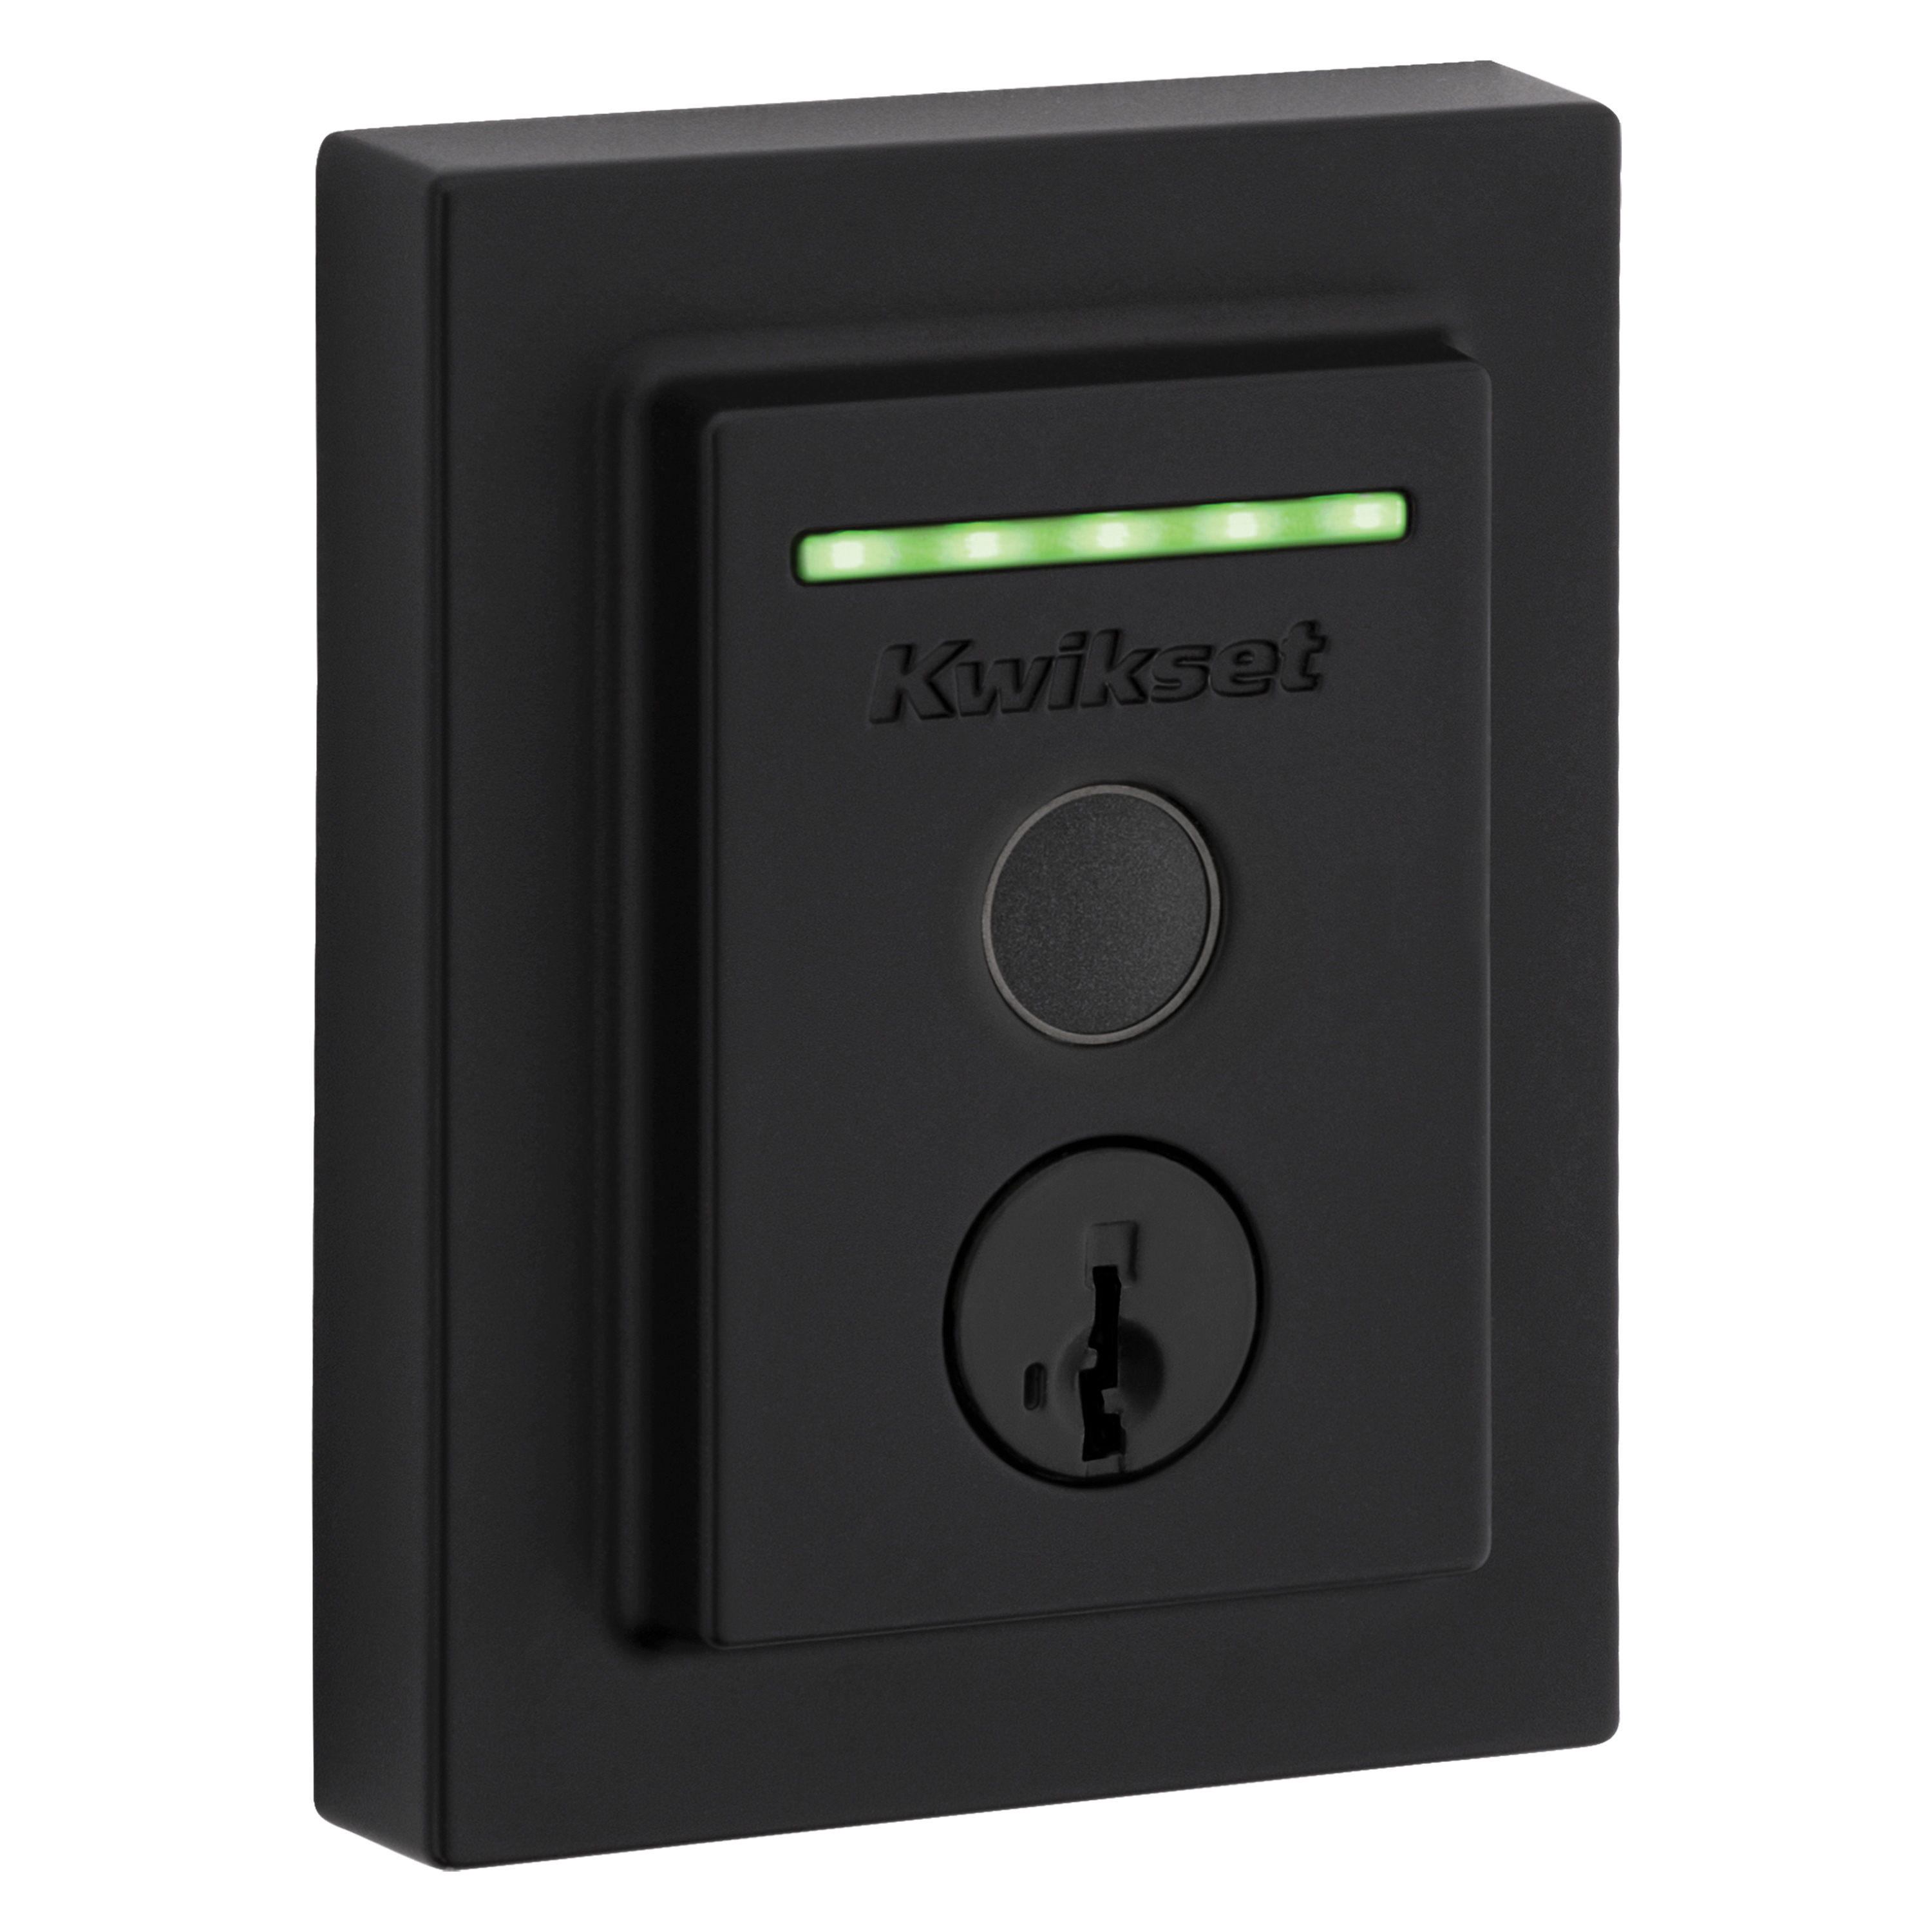 Kwikset Halo Series 959 CNT FPTR WIFI 514 Electronic Deadbolt, Matte Black, Residential, Brass/Steel, OS: Android